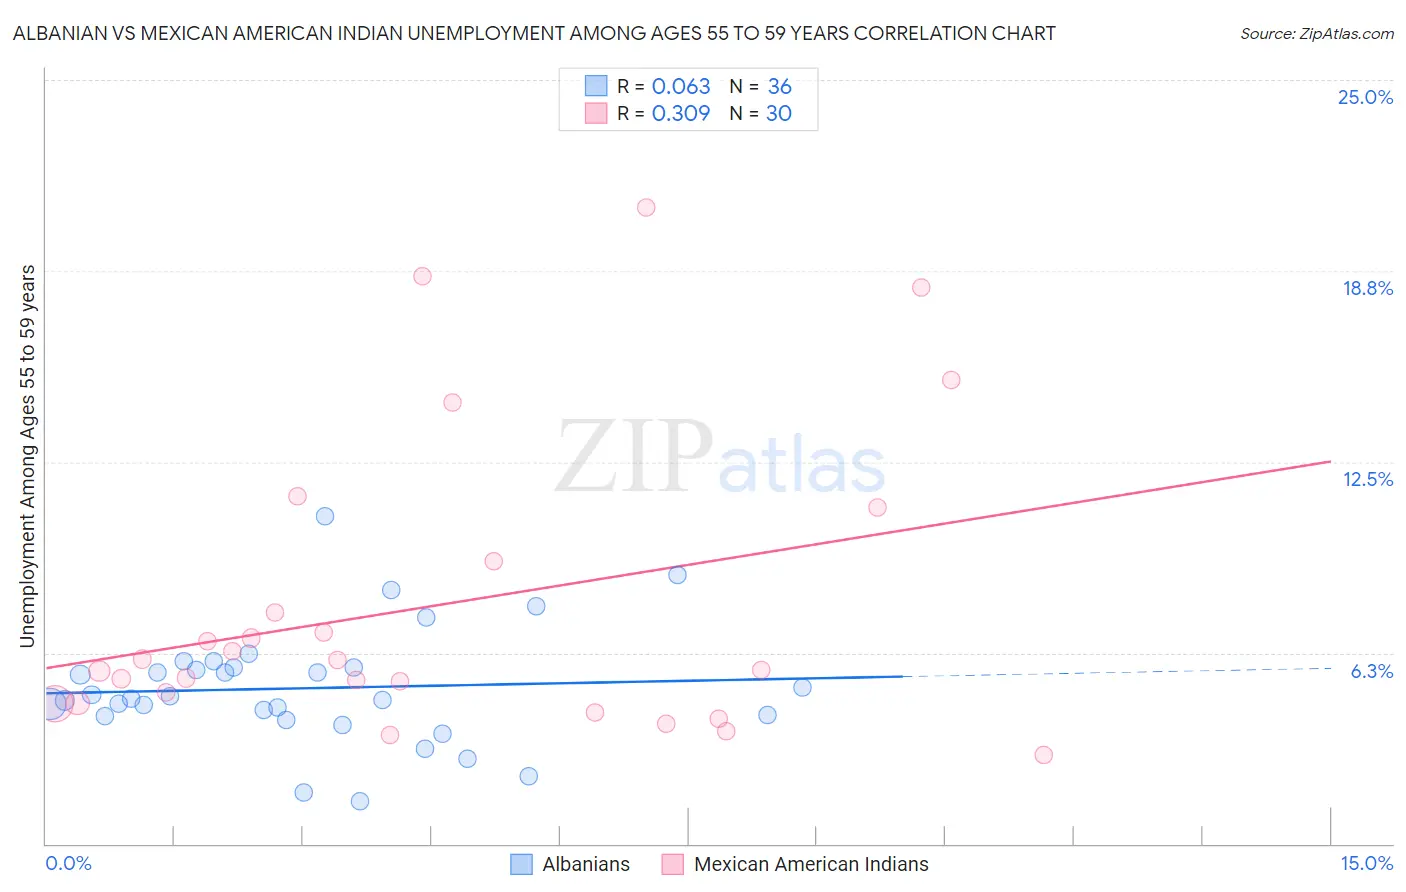 Albanian vs Mexican American Indian Unemployment Among Ages 55 to 59 years